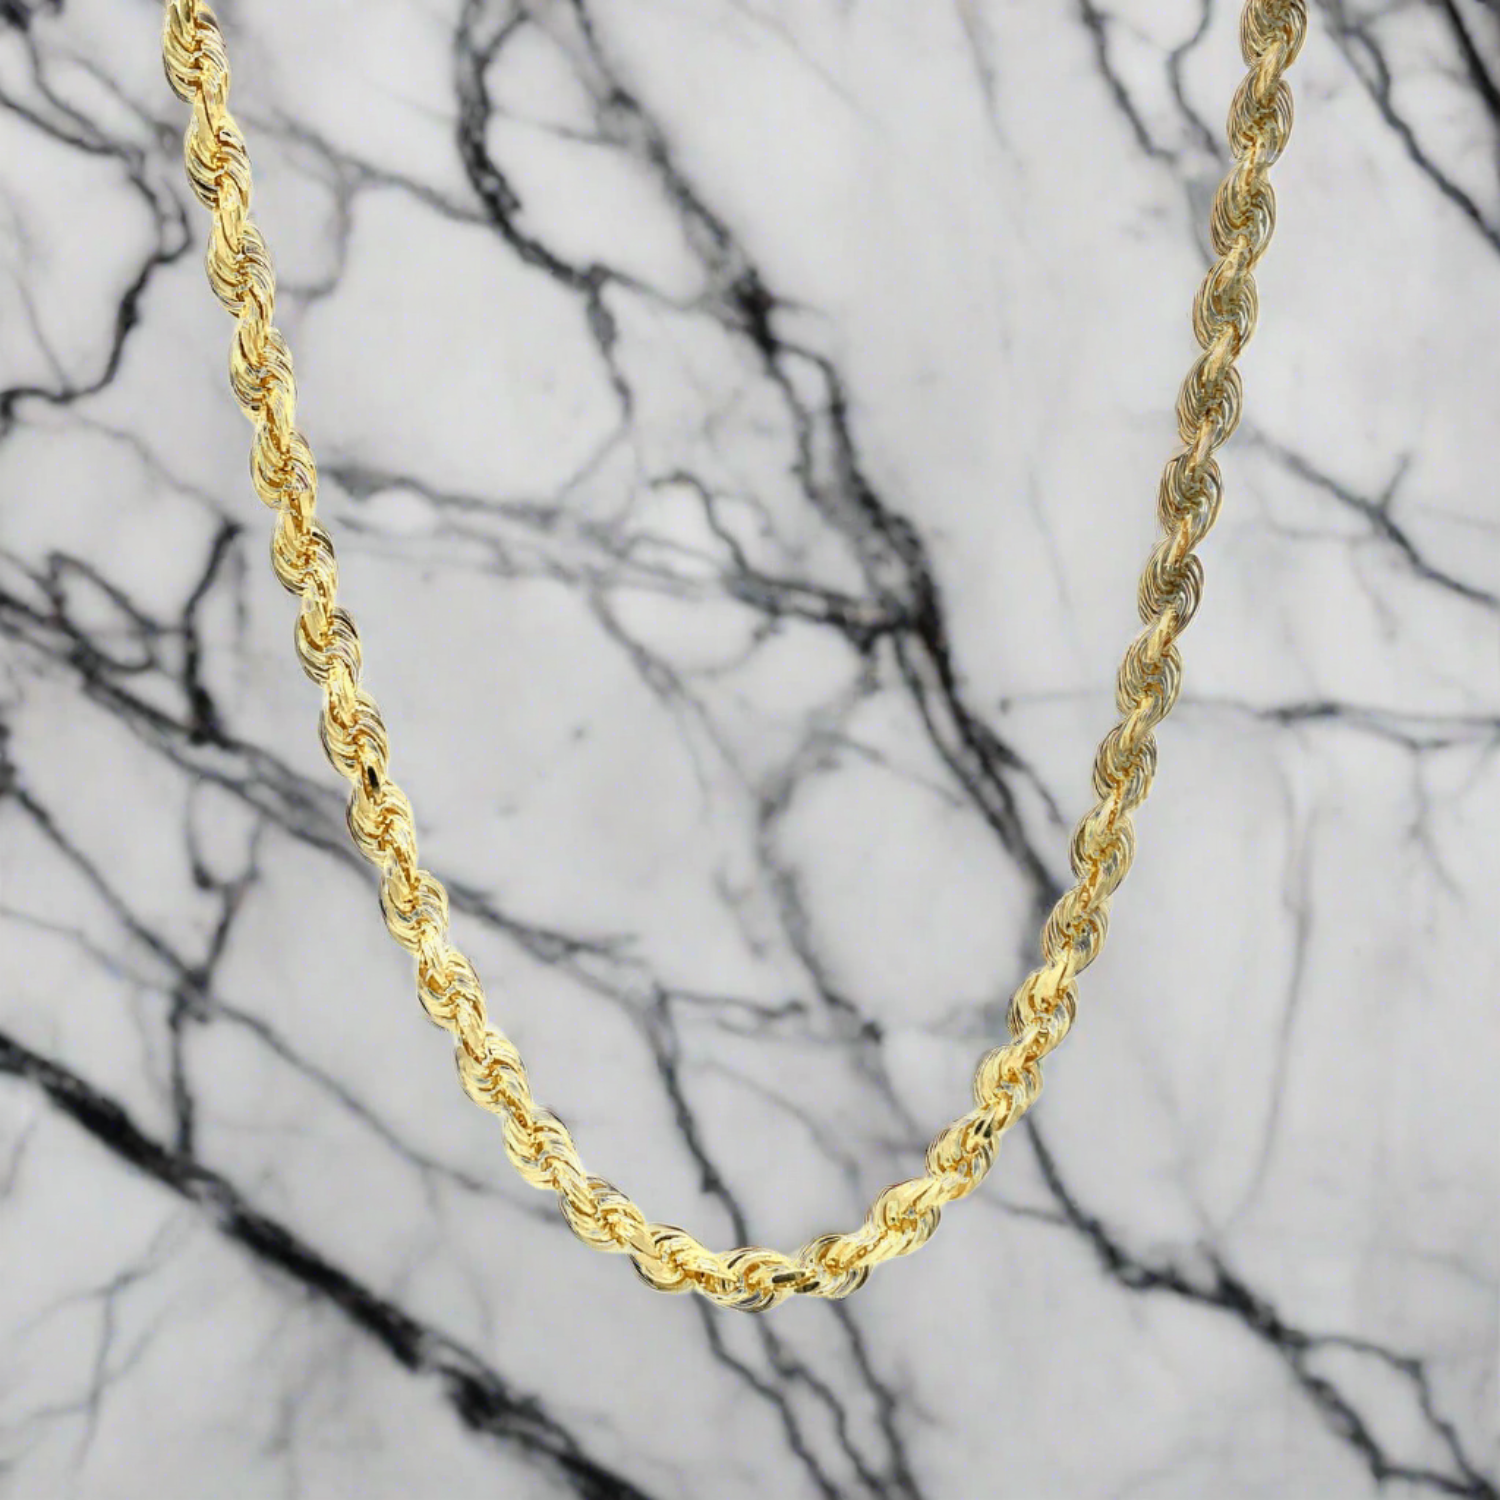 3.5mm 10k Yellow Gold Solid Diamond Cut Rope Chain